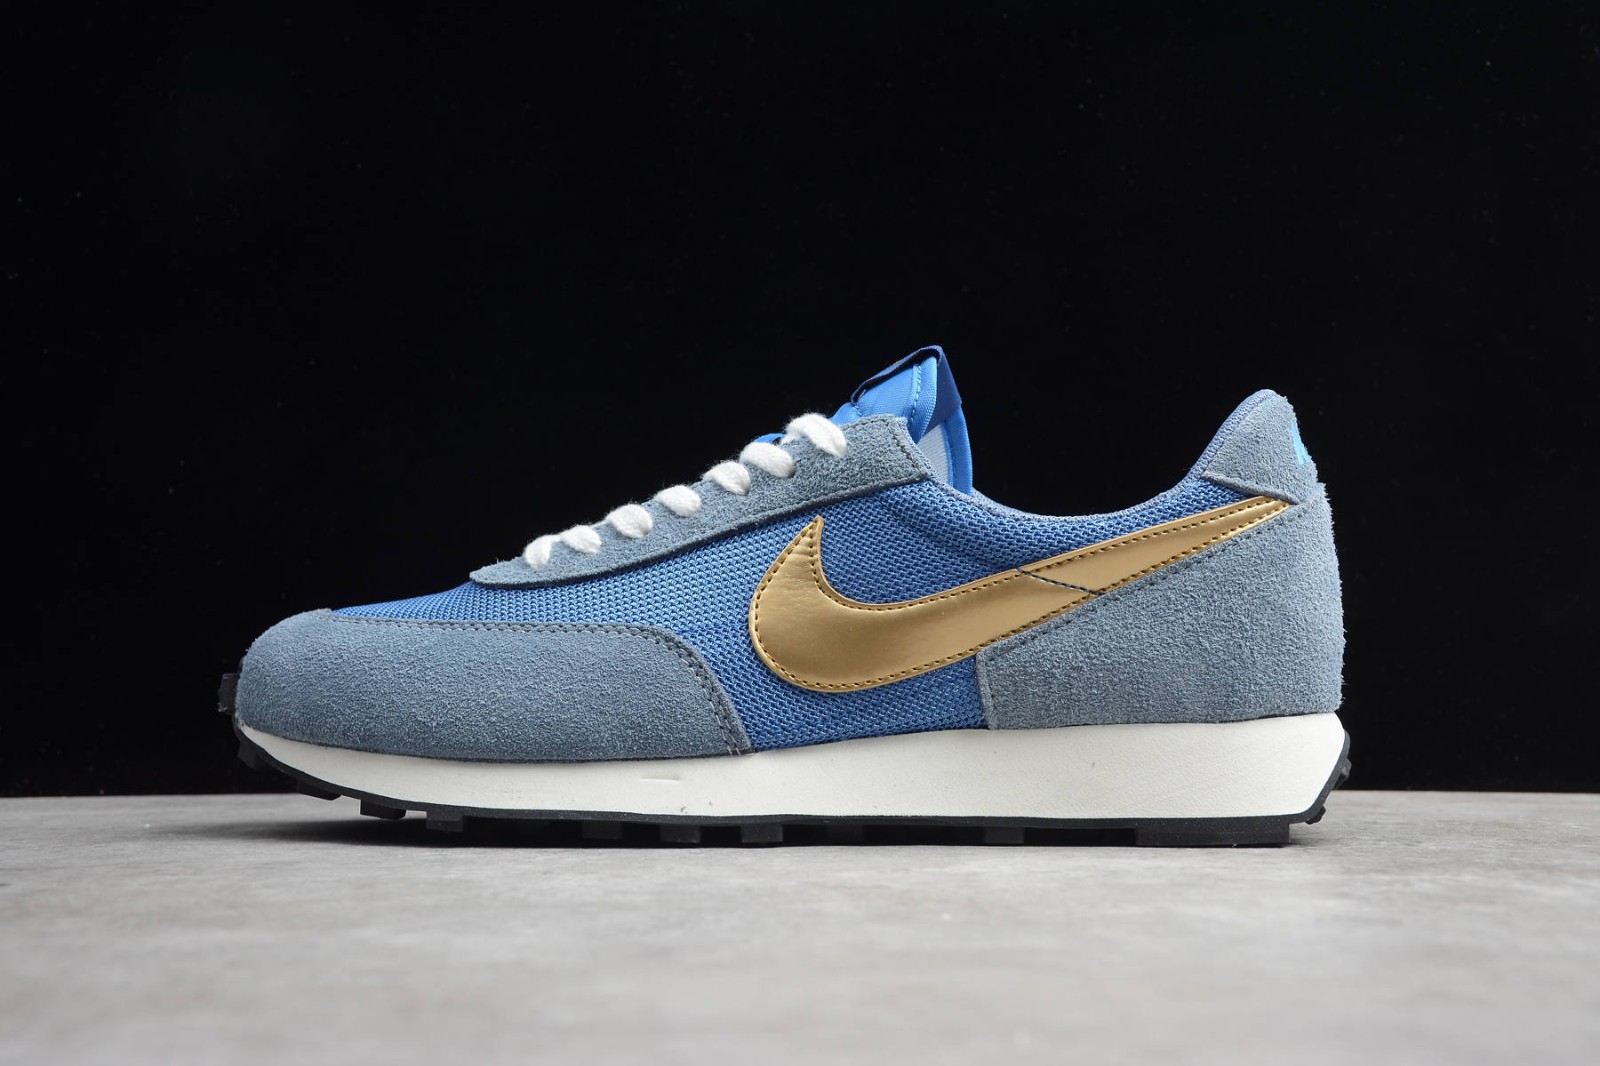 GmarShops - Nike Daybreak SP Ocean Metallic Gold Waffle Racer Running sonic Shoes BV7725 - 410 - sonic shoes made in usa brands wolverine allen edmonds lucchese